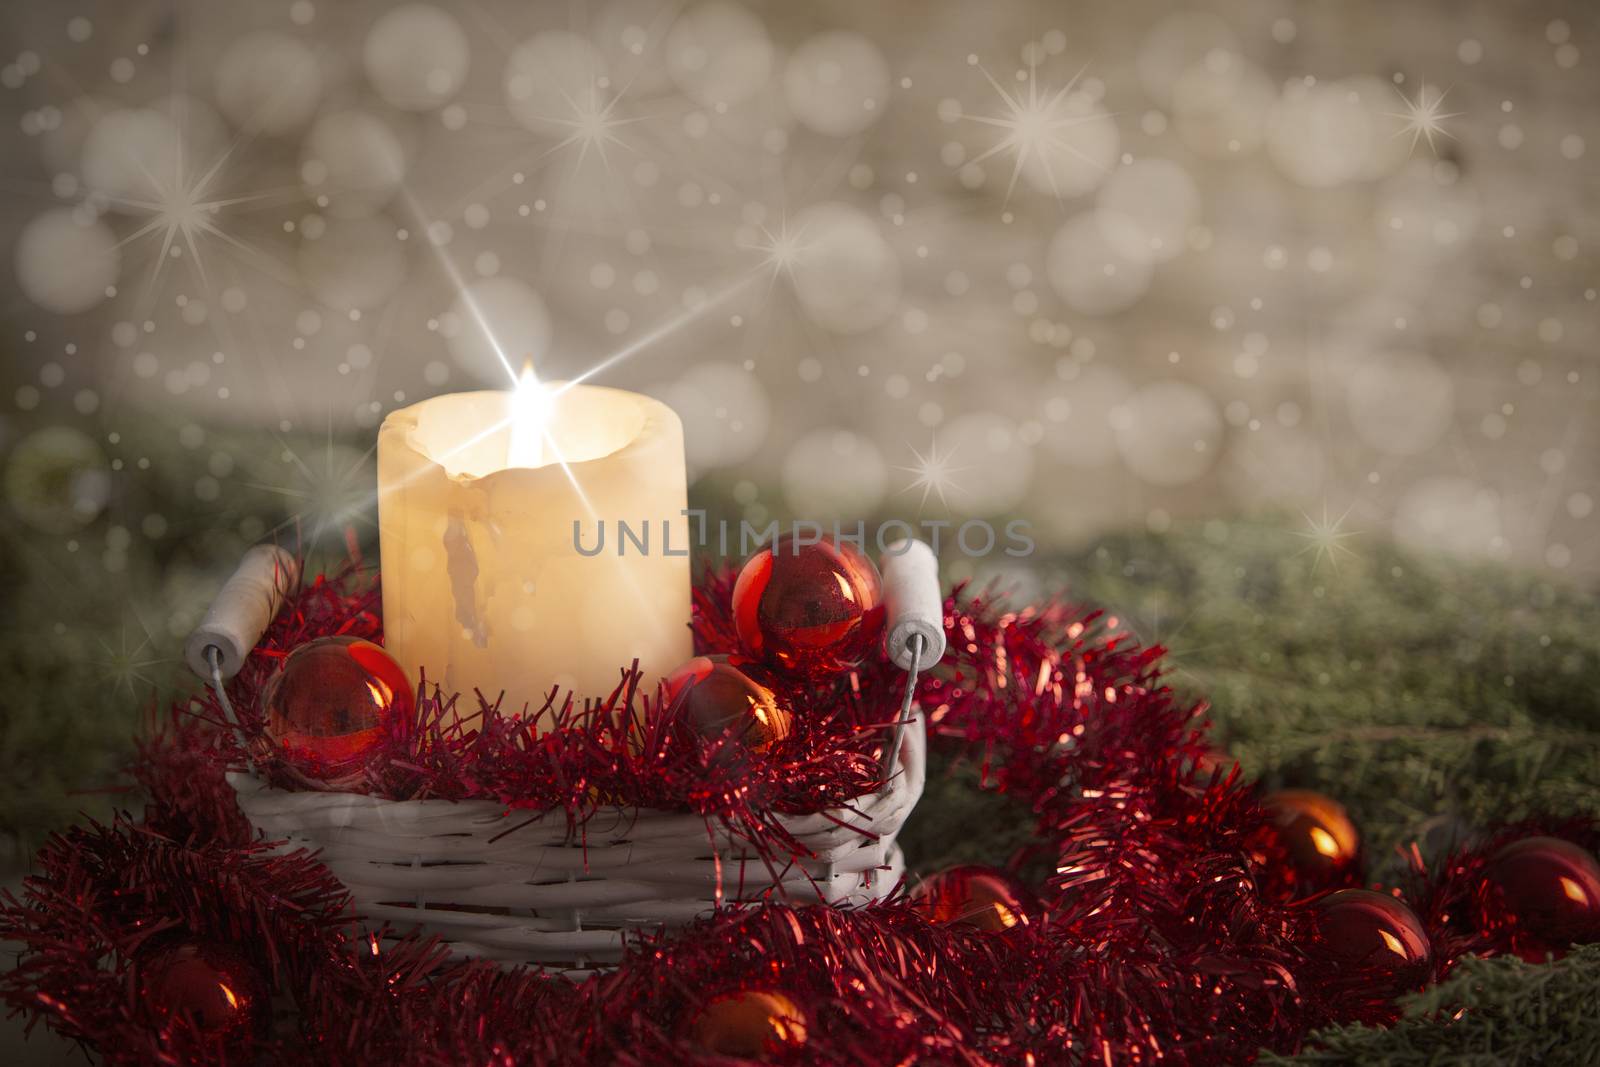 Christmas concept: a lit candle lit with cross screen stars effect in a white shabby basket with red Christmas baubles, red decorative wreath, natural pine branch, wooden background and snow effect by robbyfontanesi